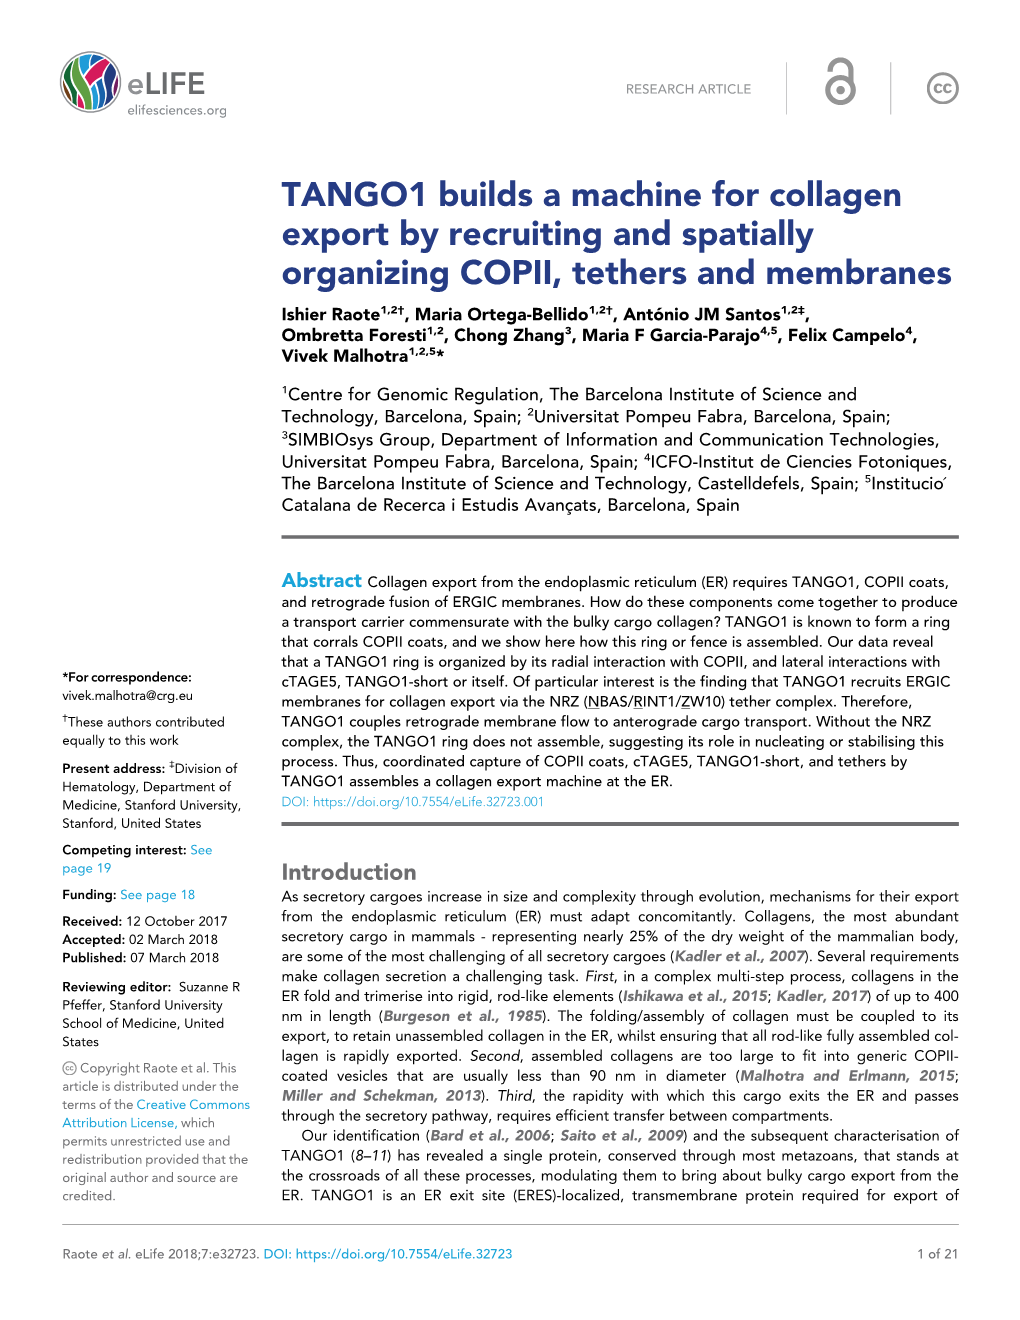 TANGO1 Builds a Machine for Collagen Export by Recruiting And